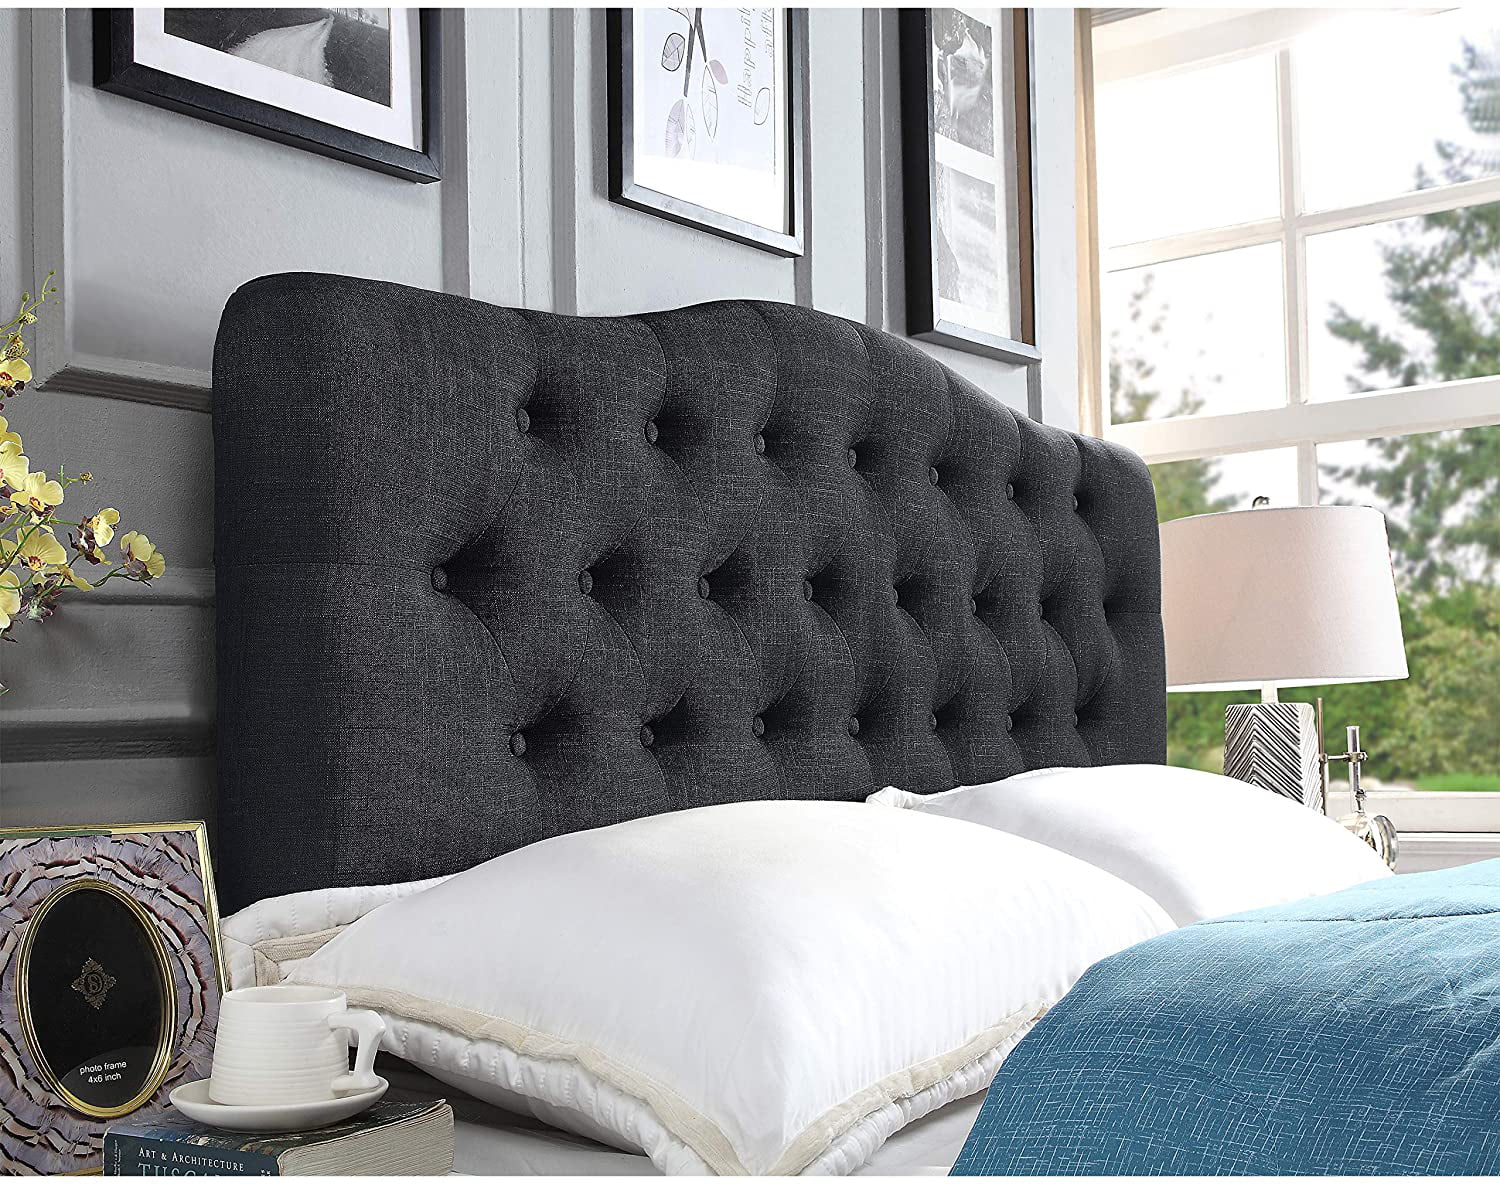 Rosevera Givanna Upholstered Panel Headboard, Queen Size In Charcoal ...